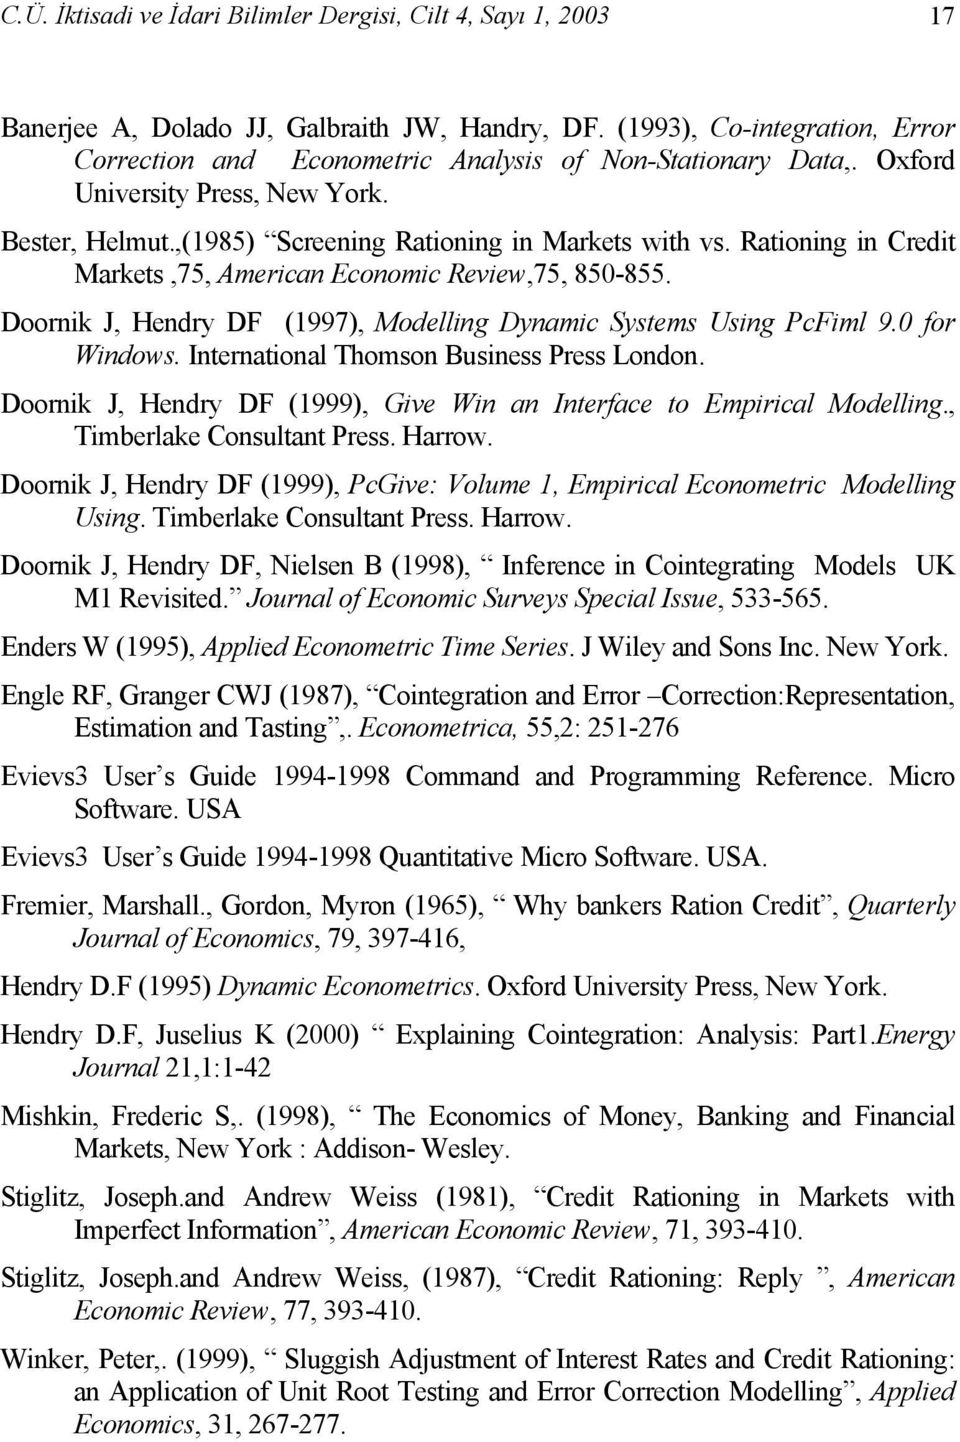 Rationing in Credit Markets,75, American Economic Review,75, 850-855. Doornik J, Hendry DF (1997), Modelling Dynamic Systems Using PcFiml 9.0 for Windows. International Thomson Business Press London.